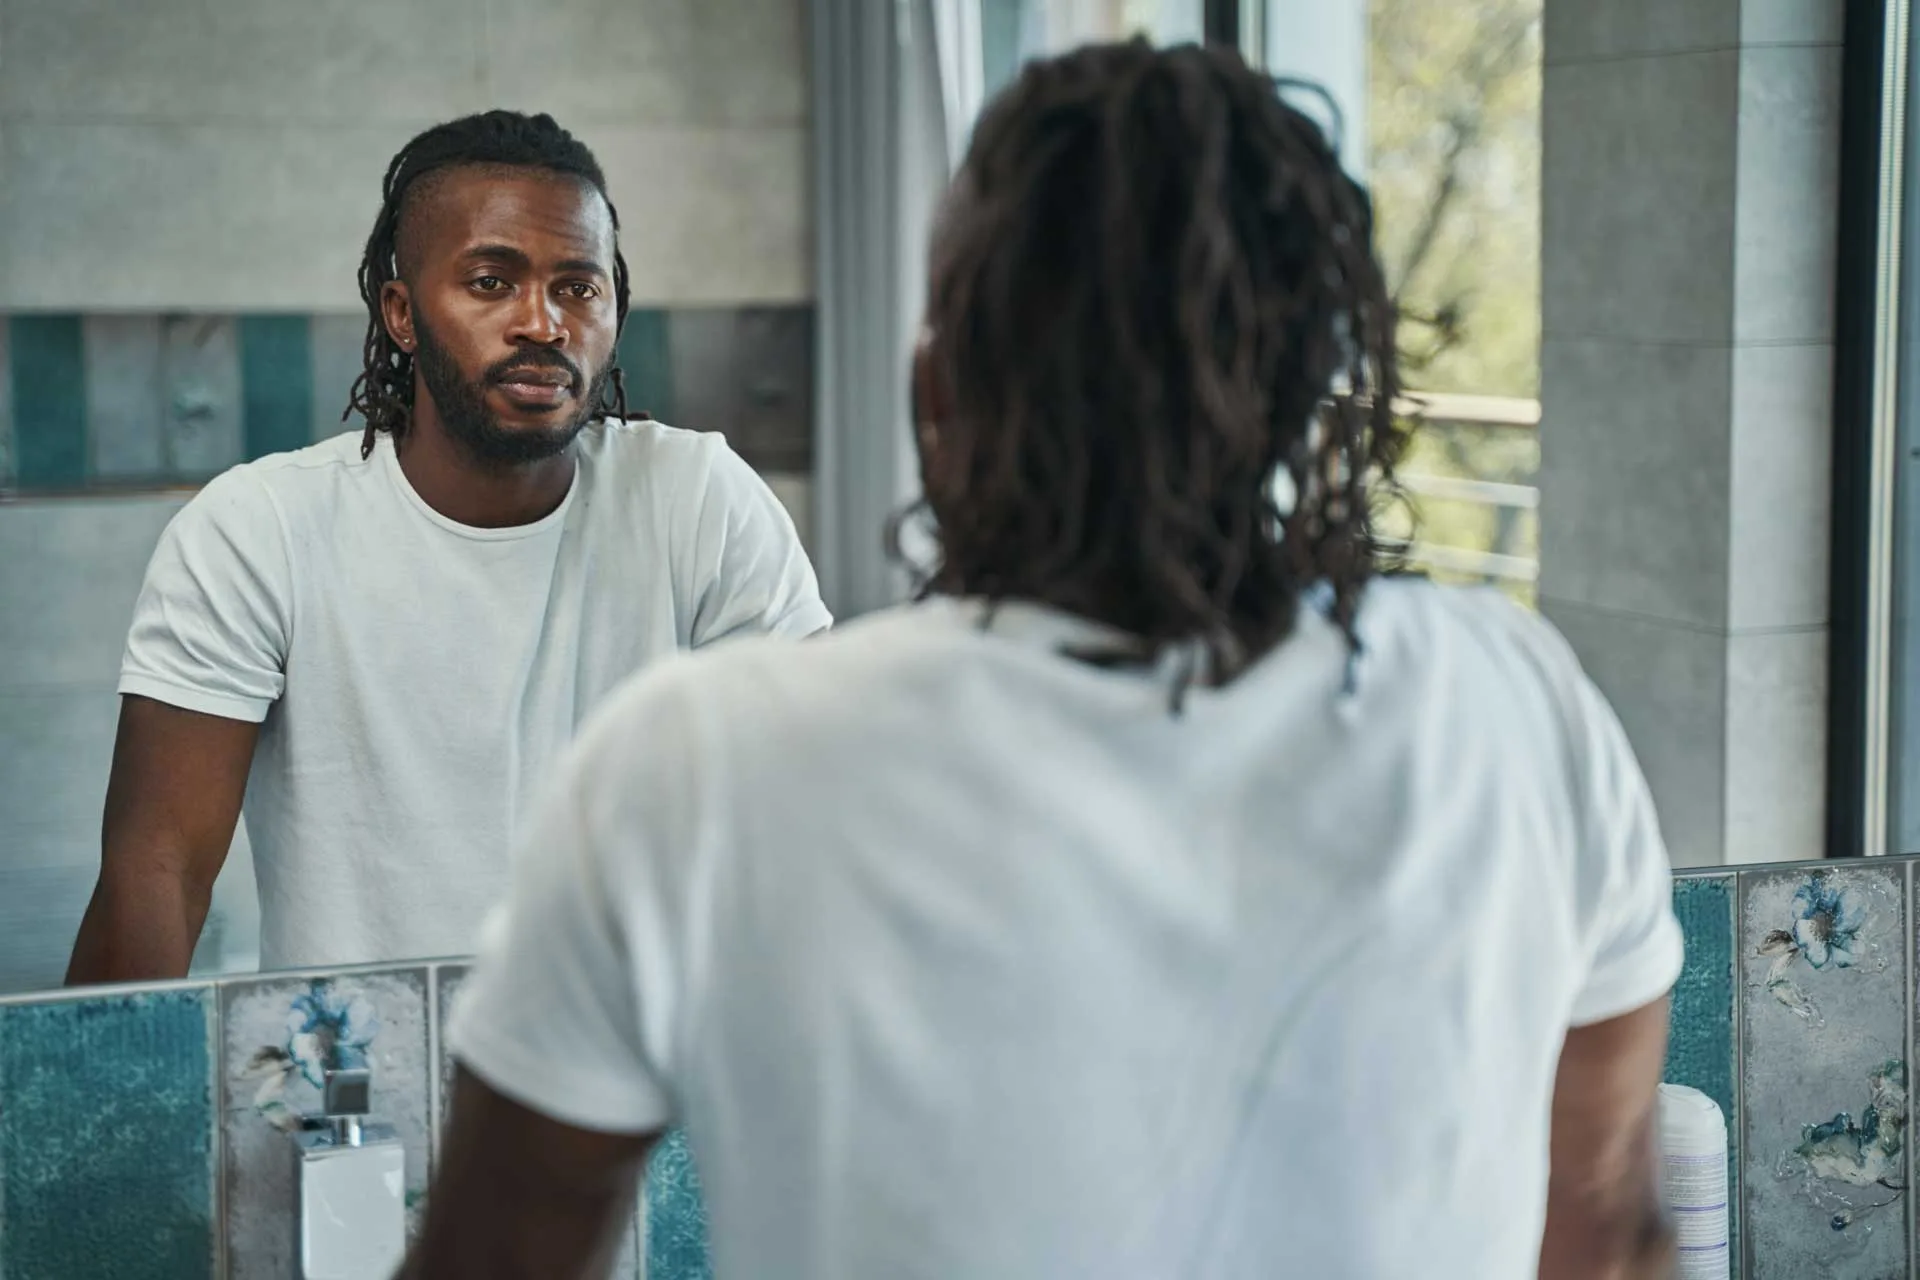 A black man looks at himself in the mirror as he struggles with poor body image.